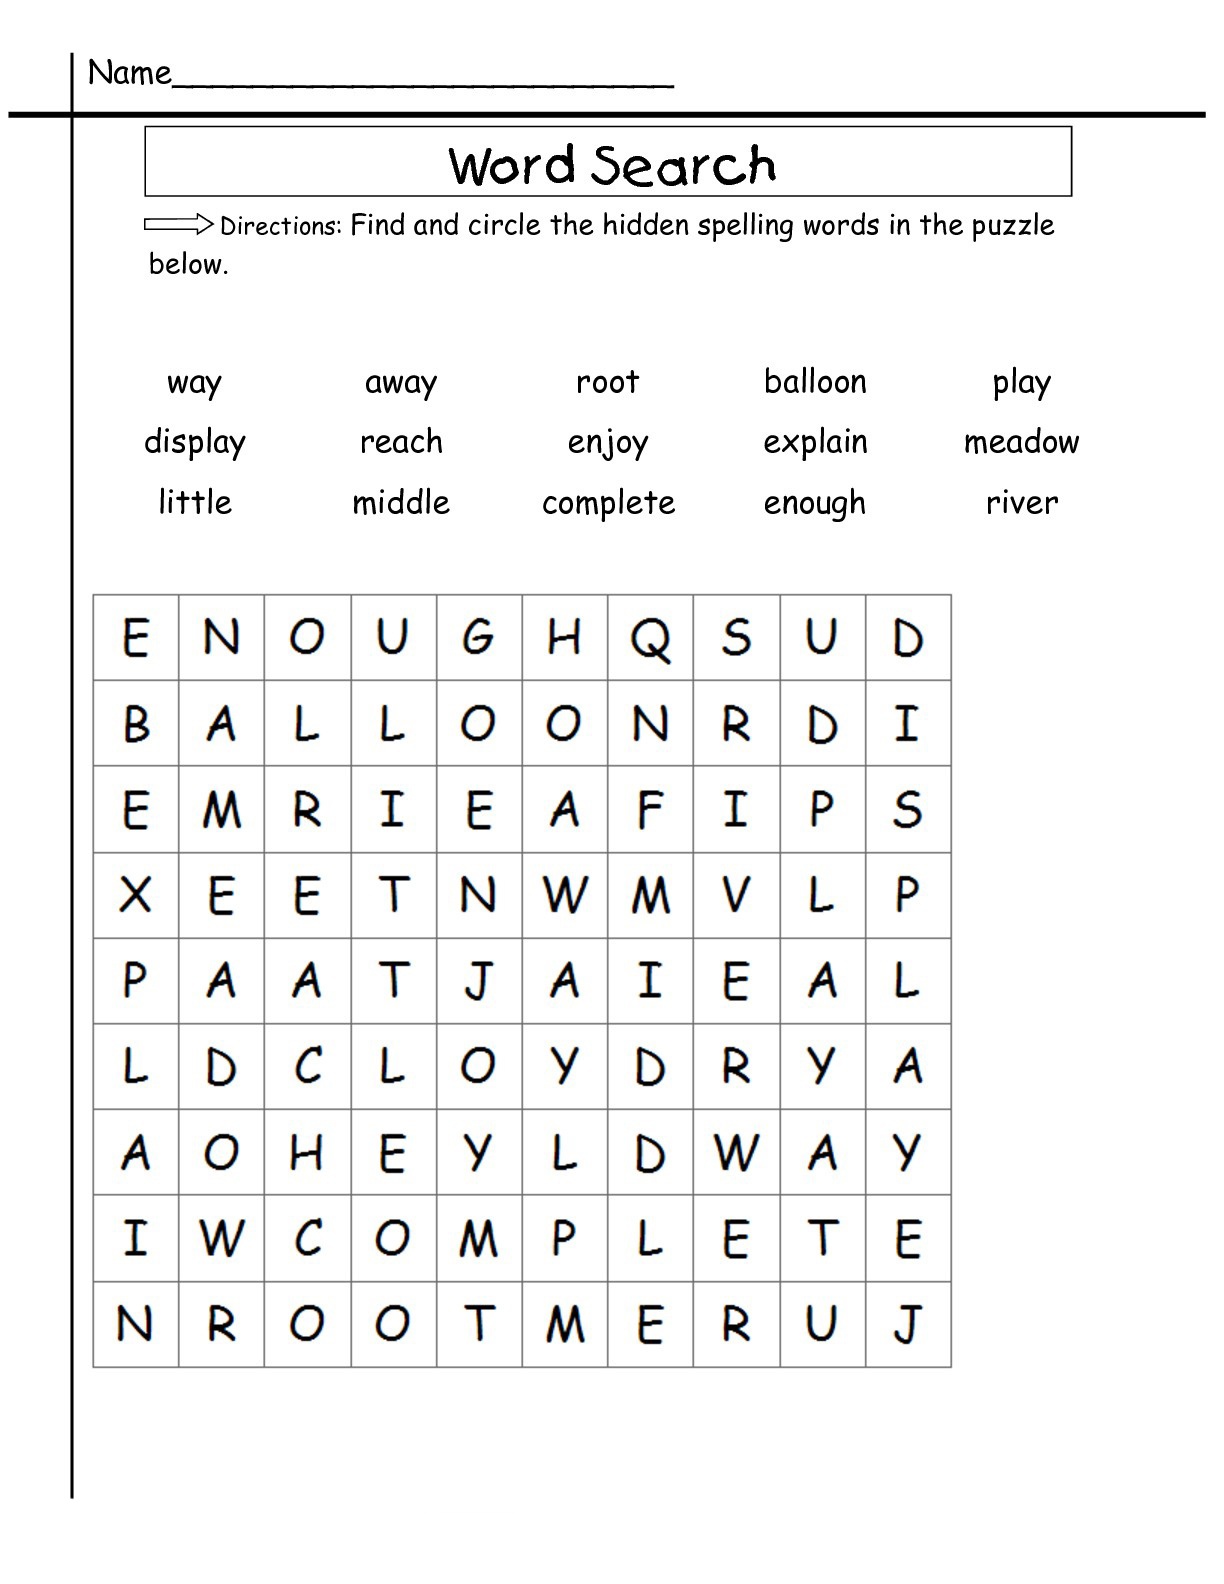 2Nd Grade Word Search - Best Coloring Pages For Kids - 2Nd Grade Word Search Free Printable